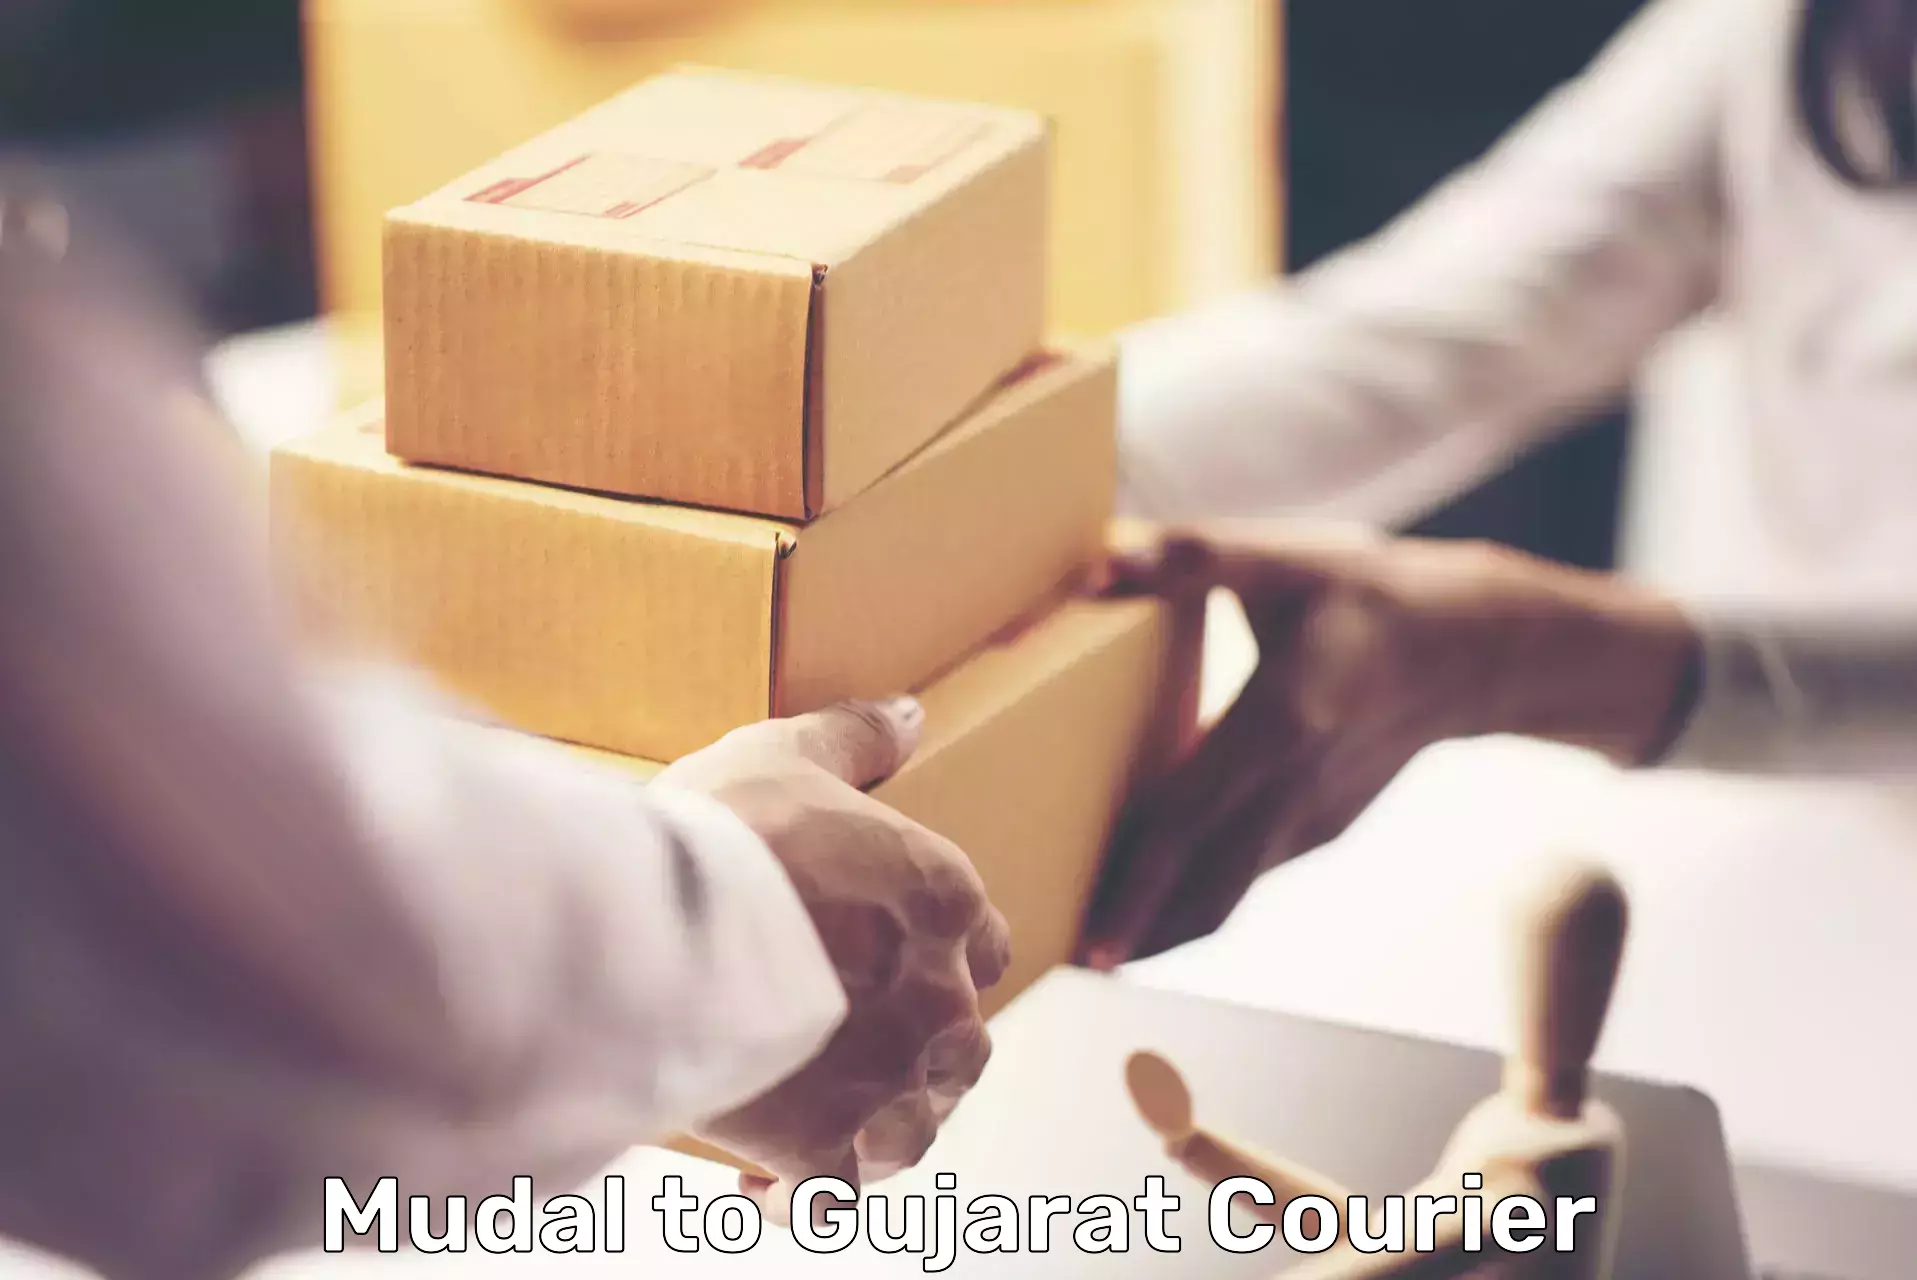 User-friendly courier app Mudal to Rajula